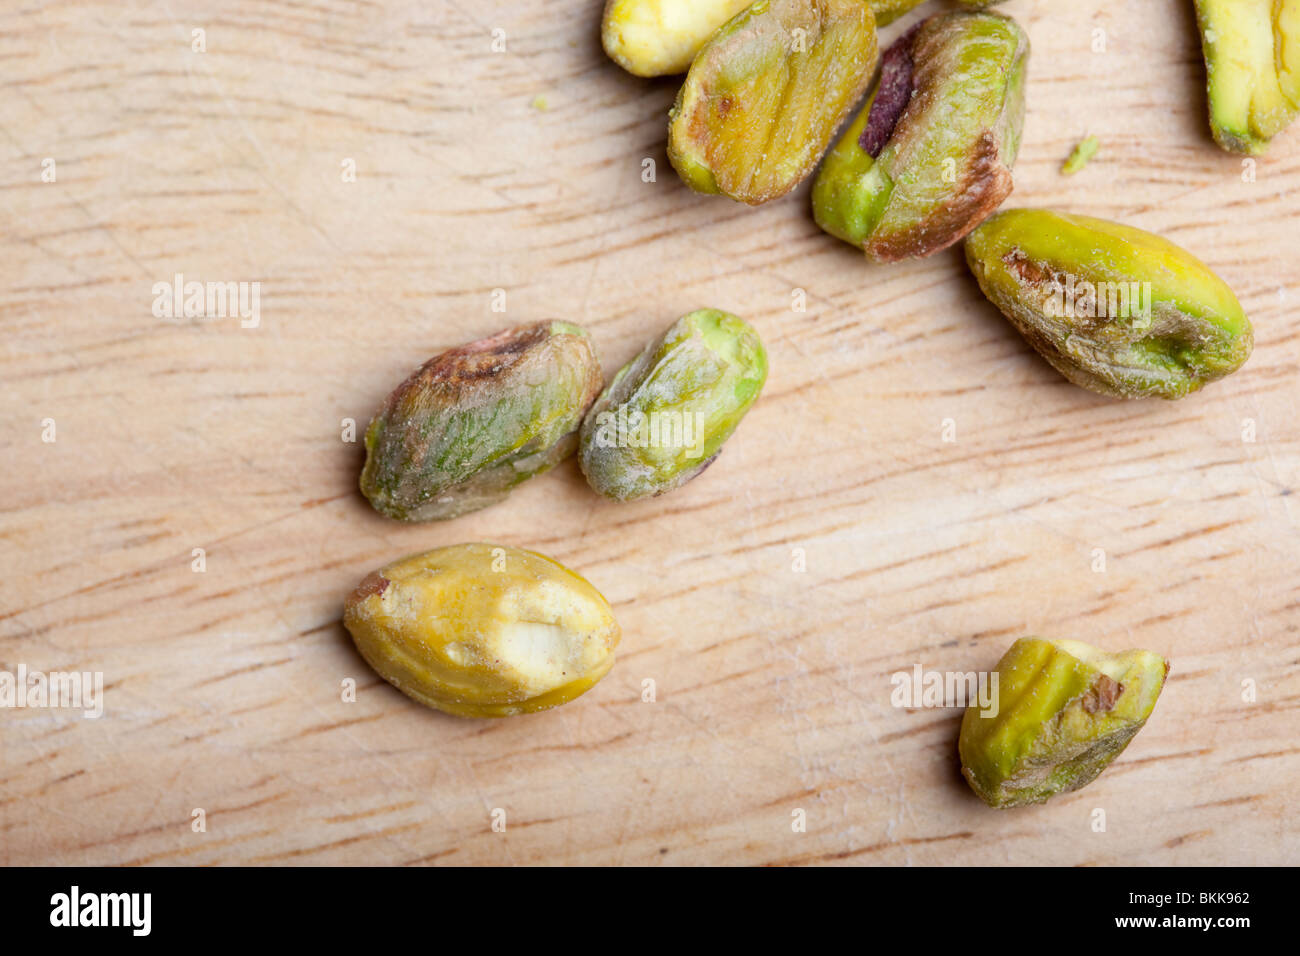 A pile of unshelled pistachio nuts on a wooden board Stock Photo